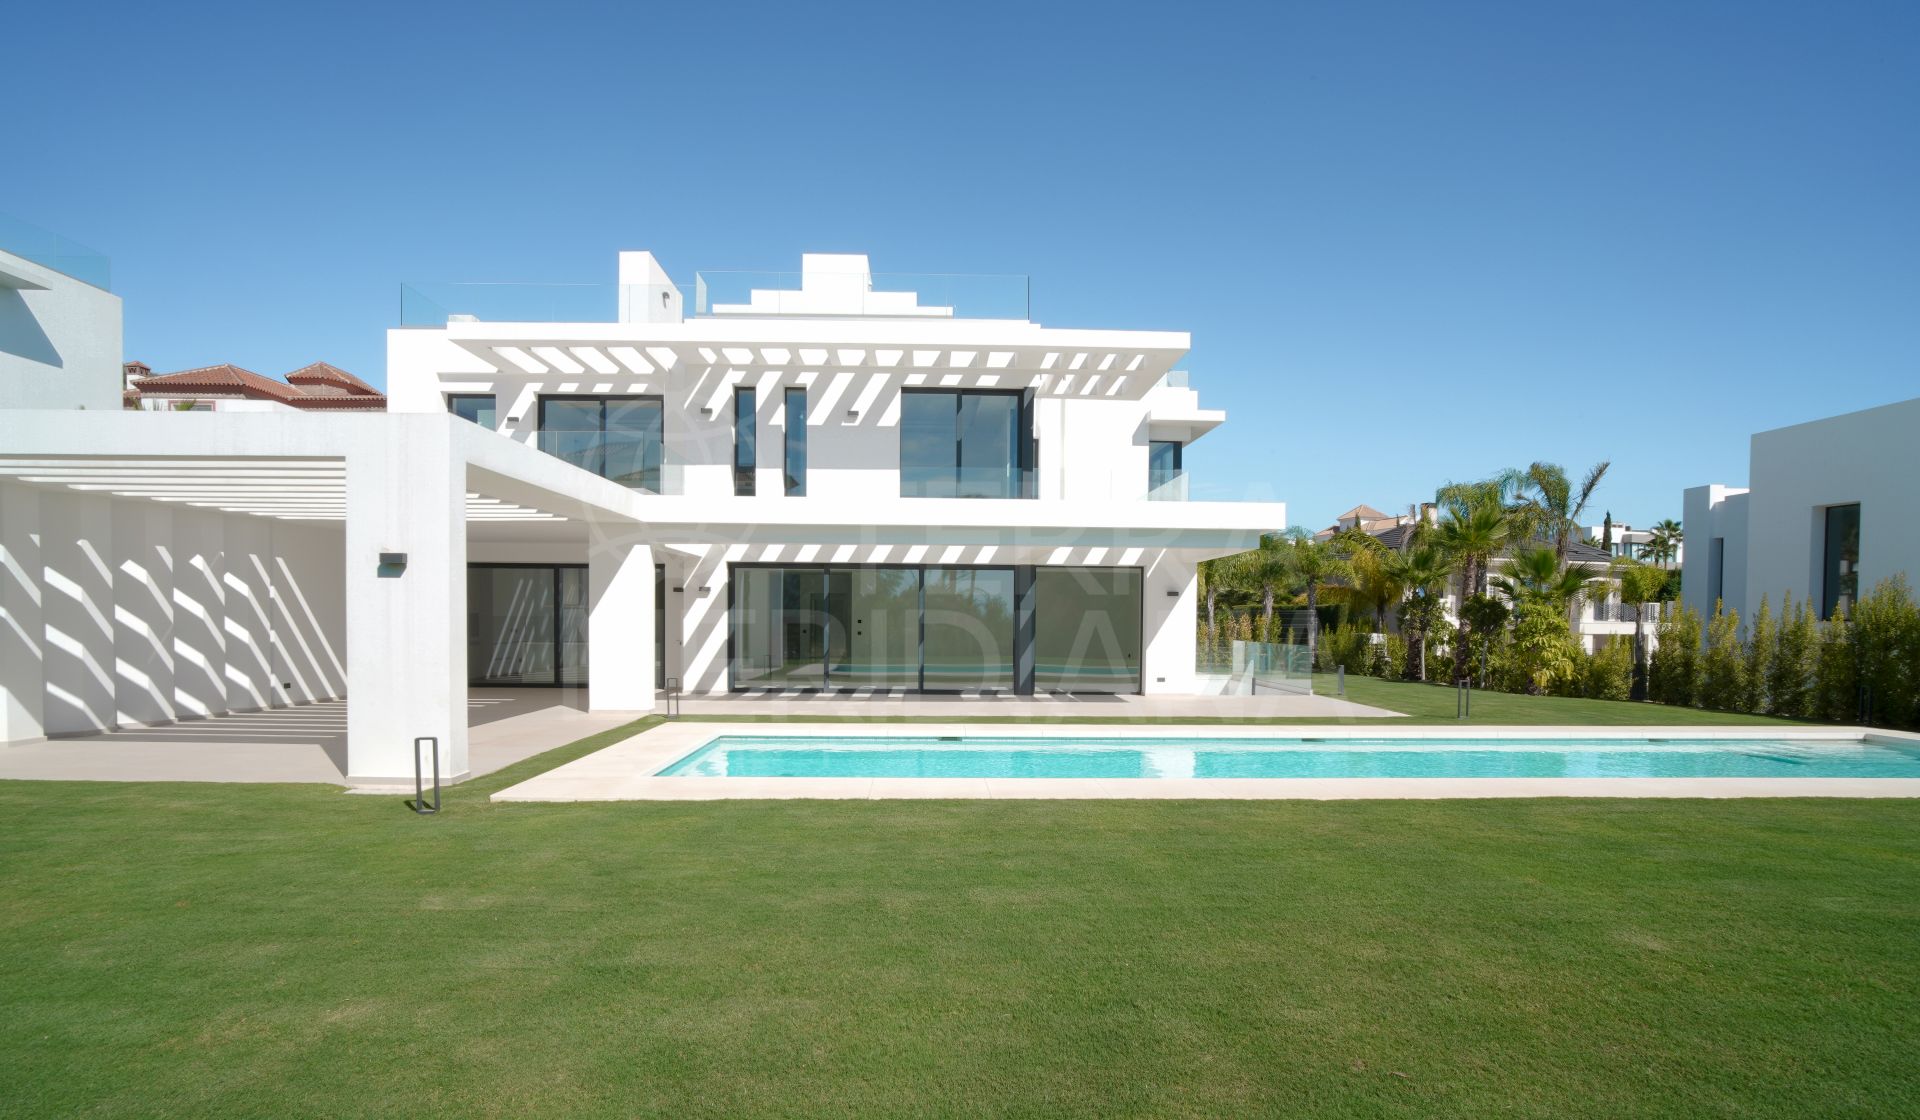 Recently completed luxury modern villa with spa for sale in Los Flamingos Golf, Benahavis